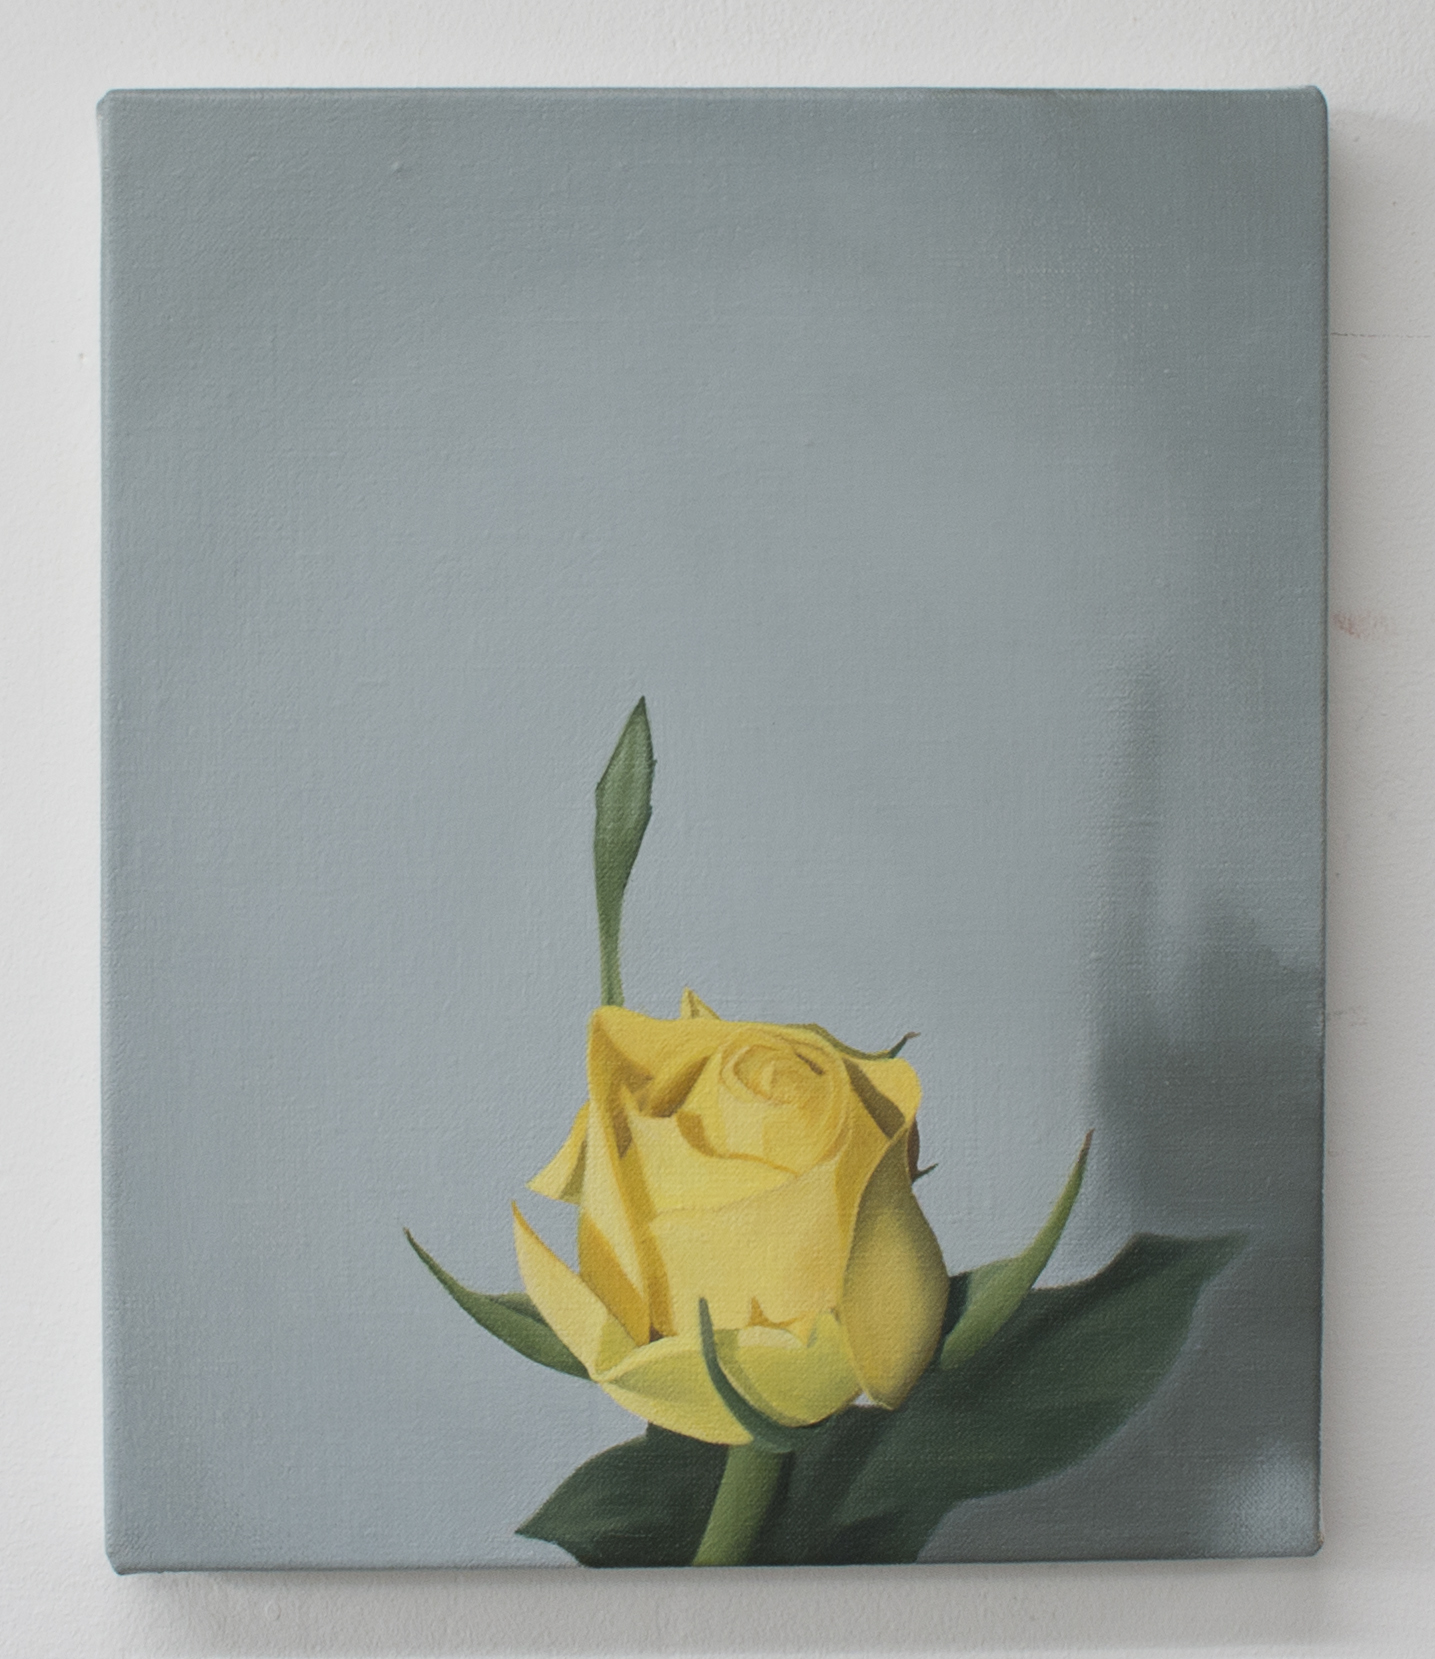  Yellow rose | 2018 | Oil on linen | 30 x 25 cm | OPW Collection IRE 